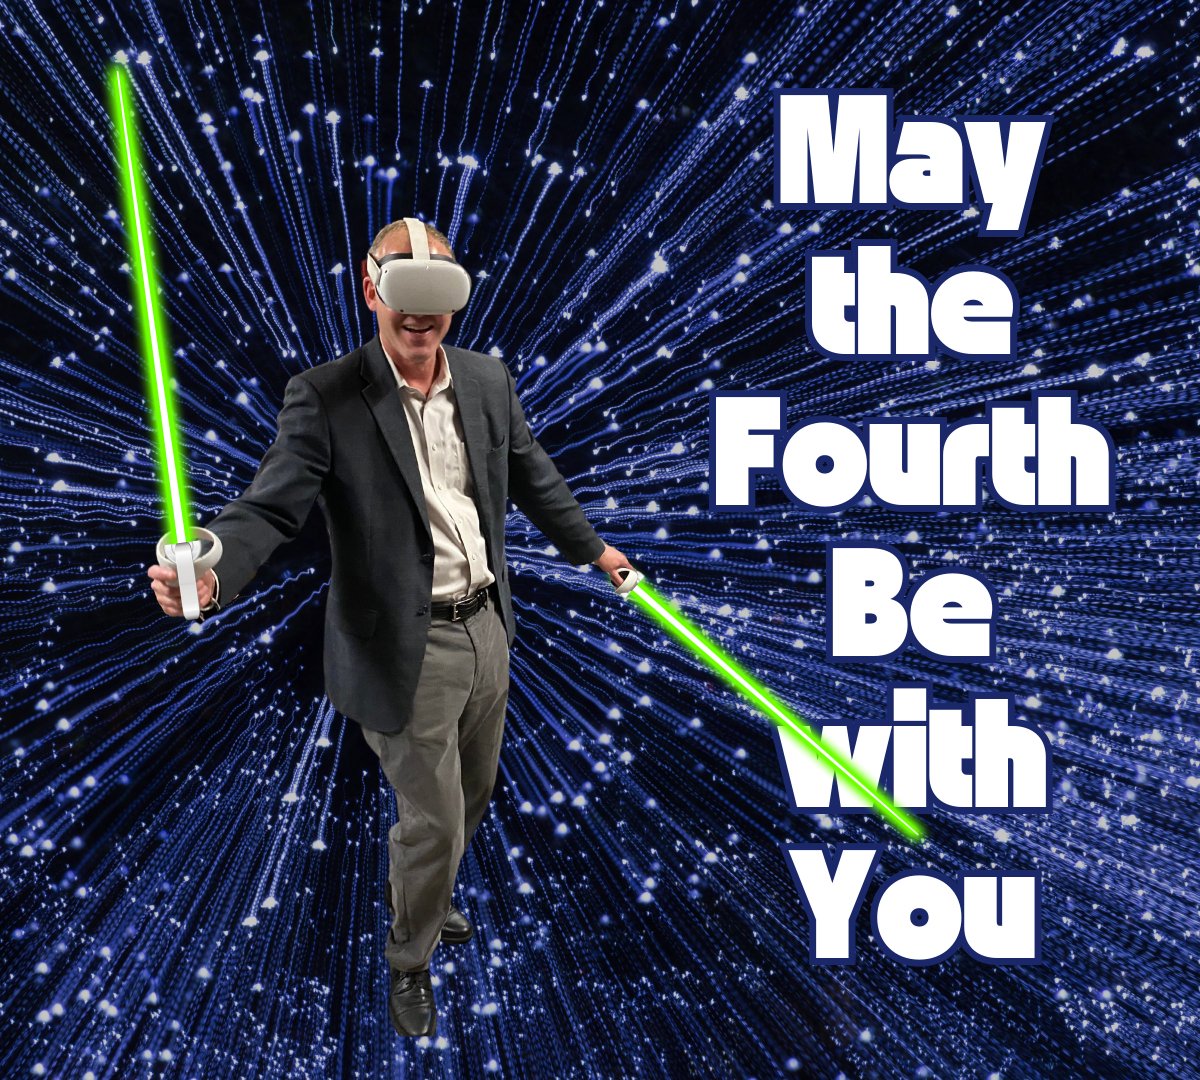 May the Fourth Be with You! Happy #StarWarsDay #mapoli